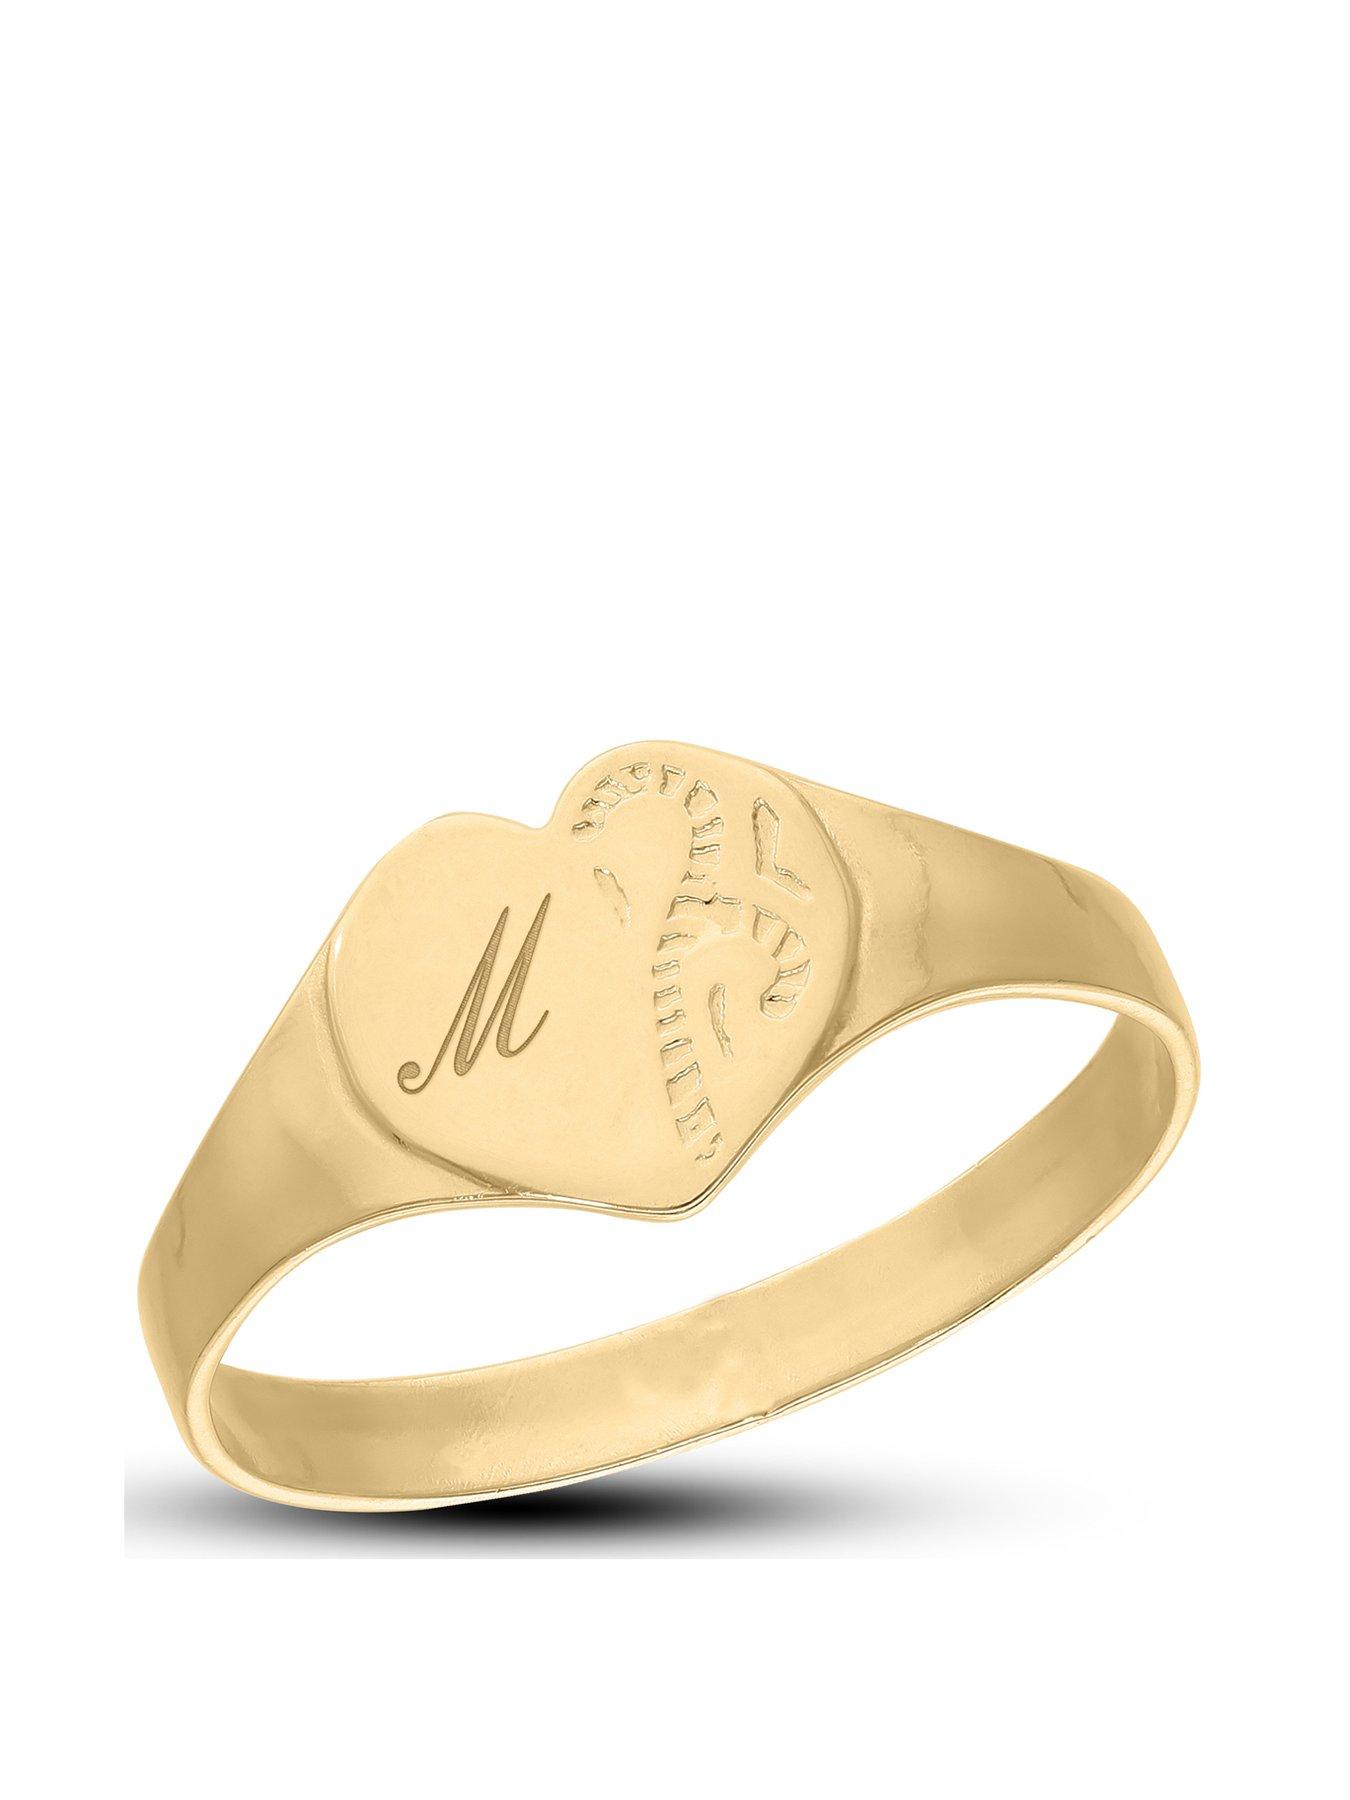  9ct Yellow Gold Personalised Heart Signet Ring